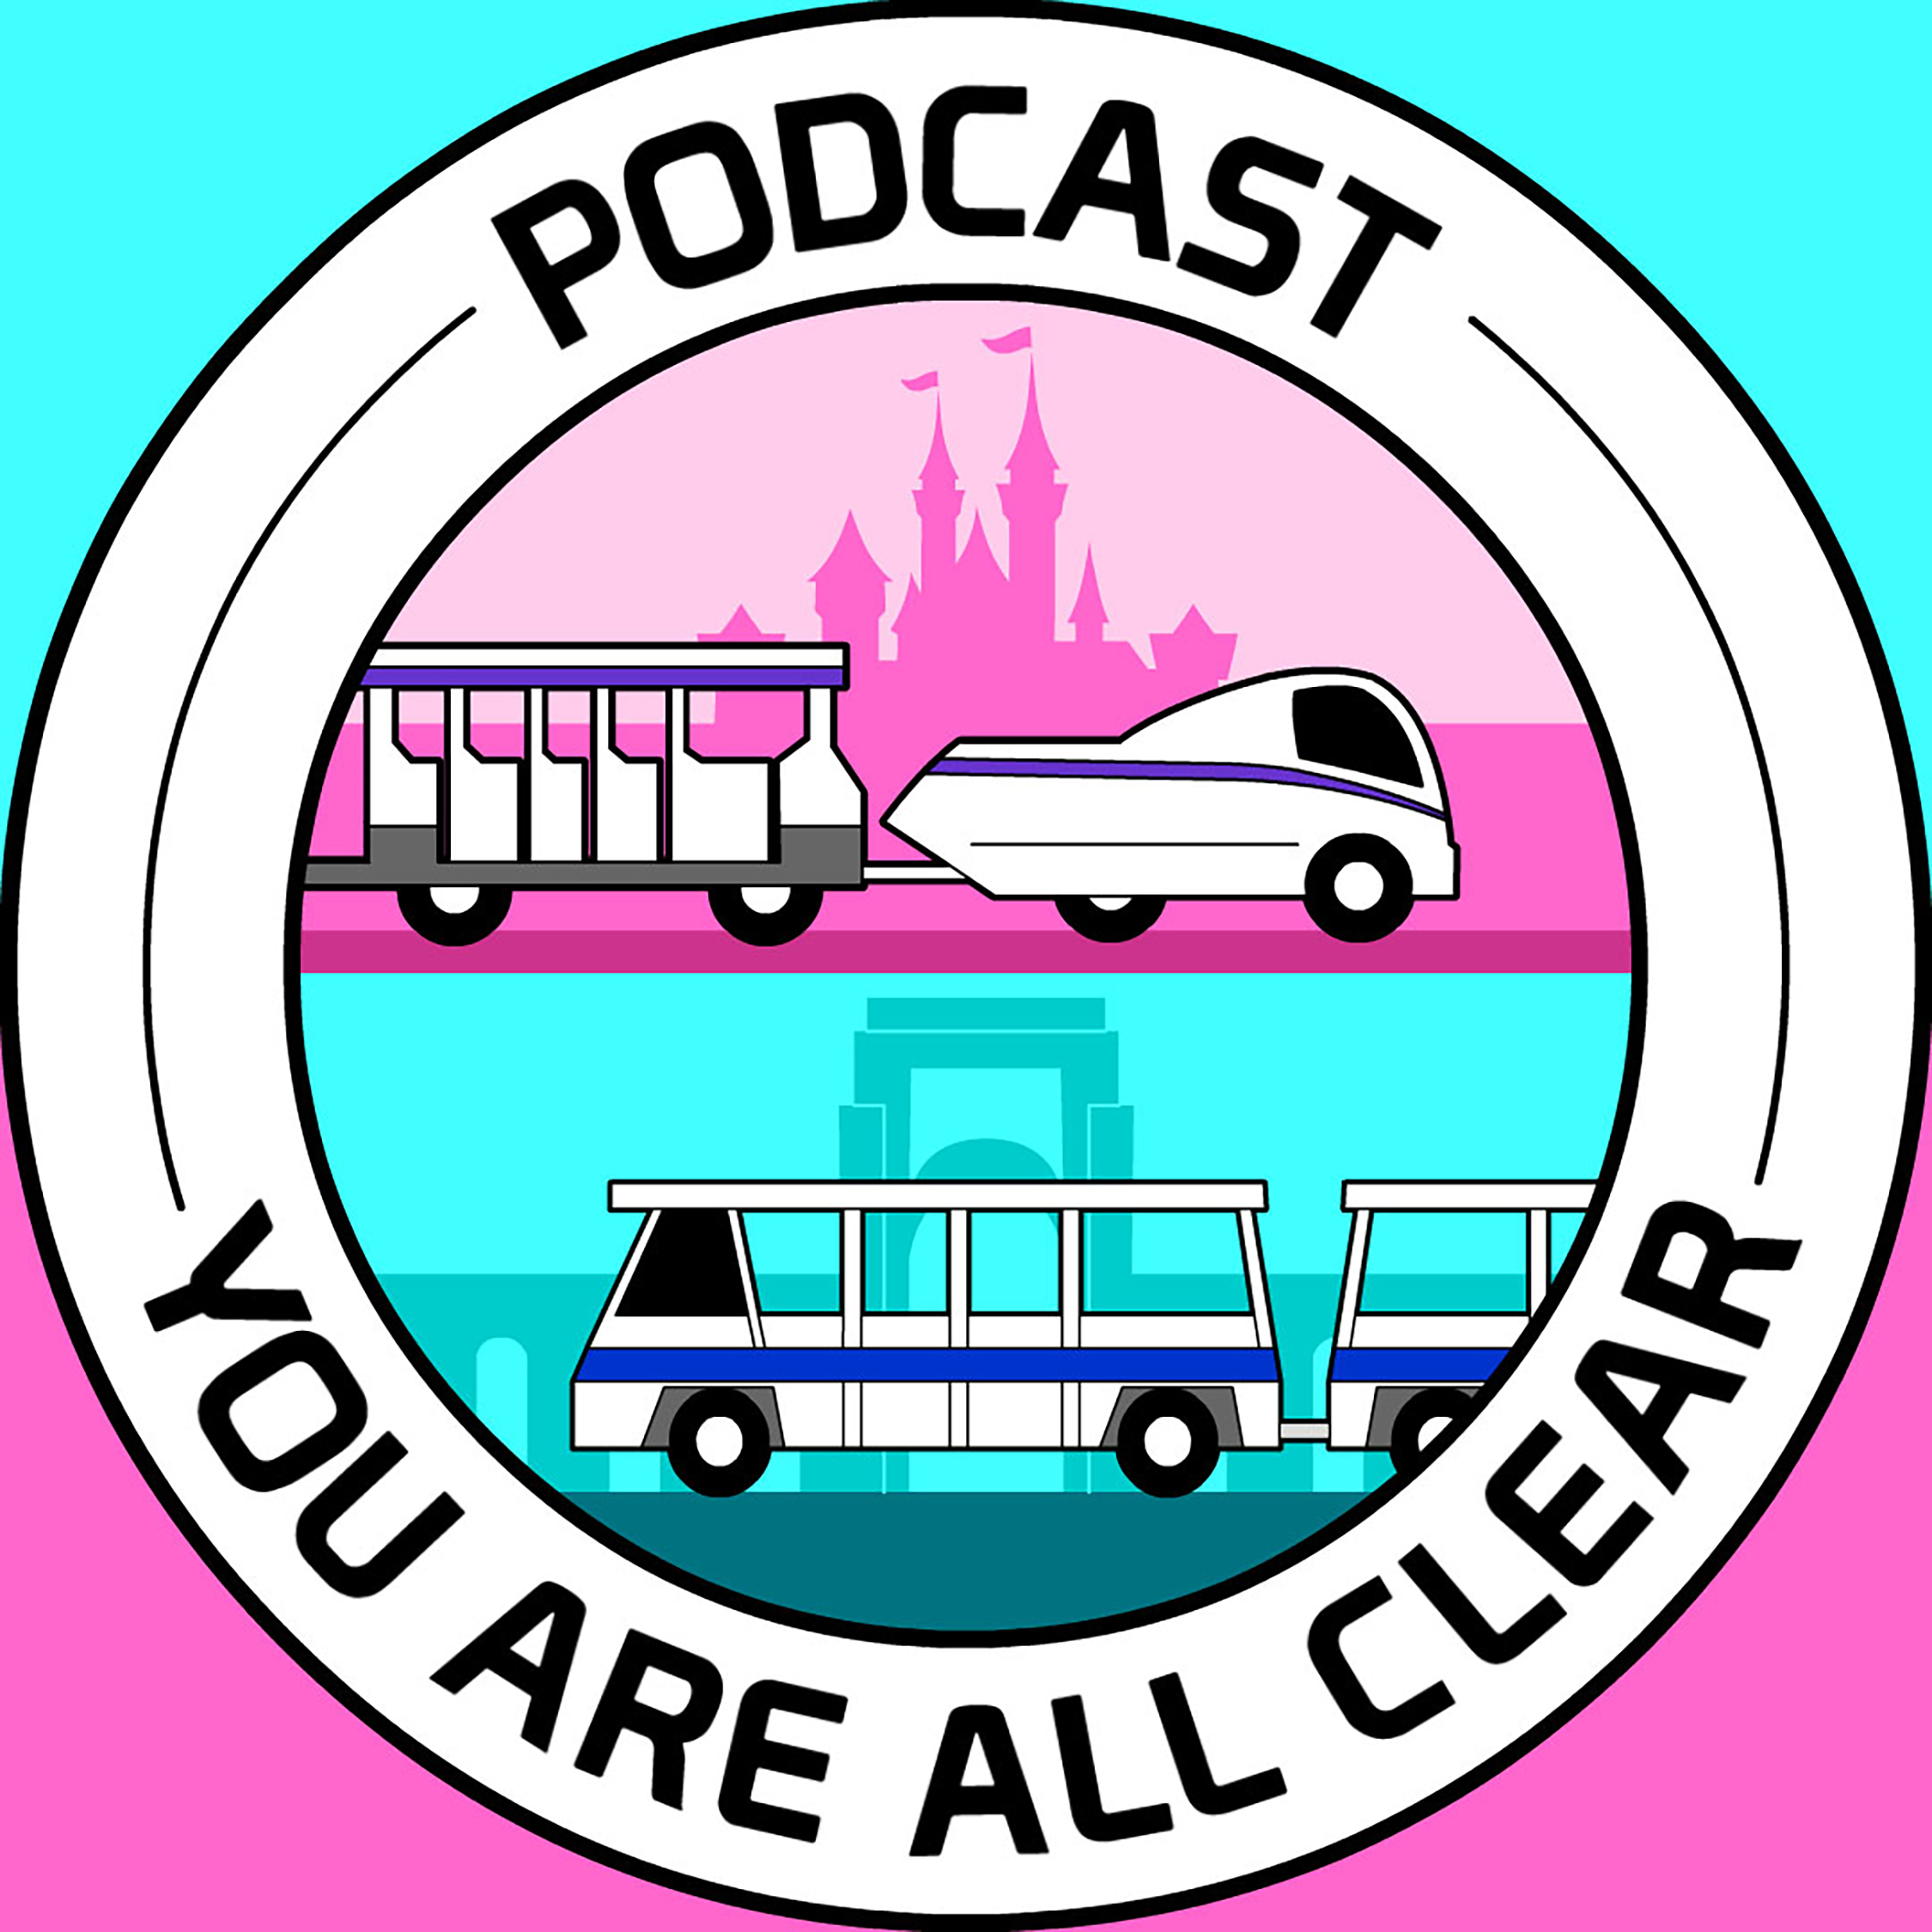 Podcast, you are all clear artwork